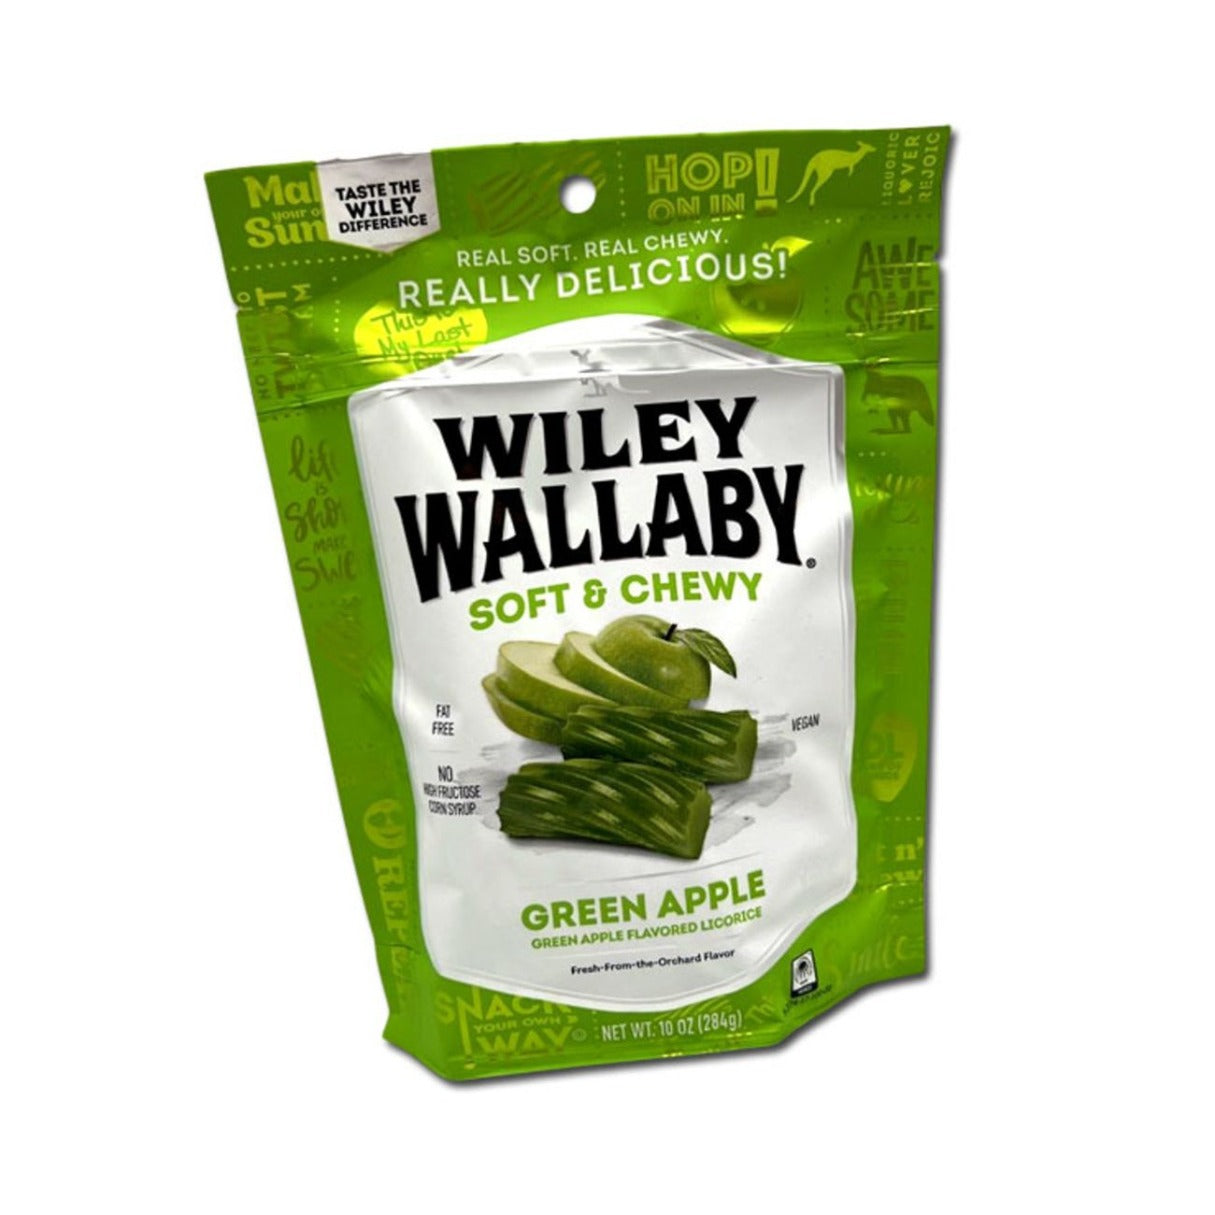 Wiley Wallaby Soft & Chewy Green Apple Licorice  10oz - 10ct